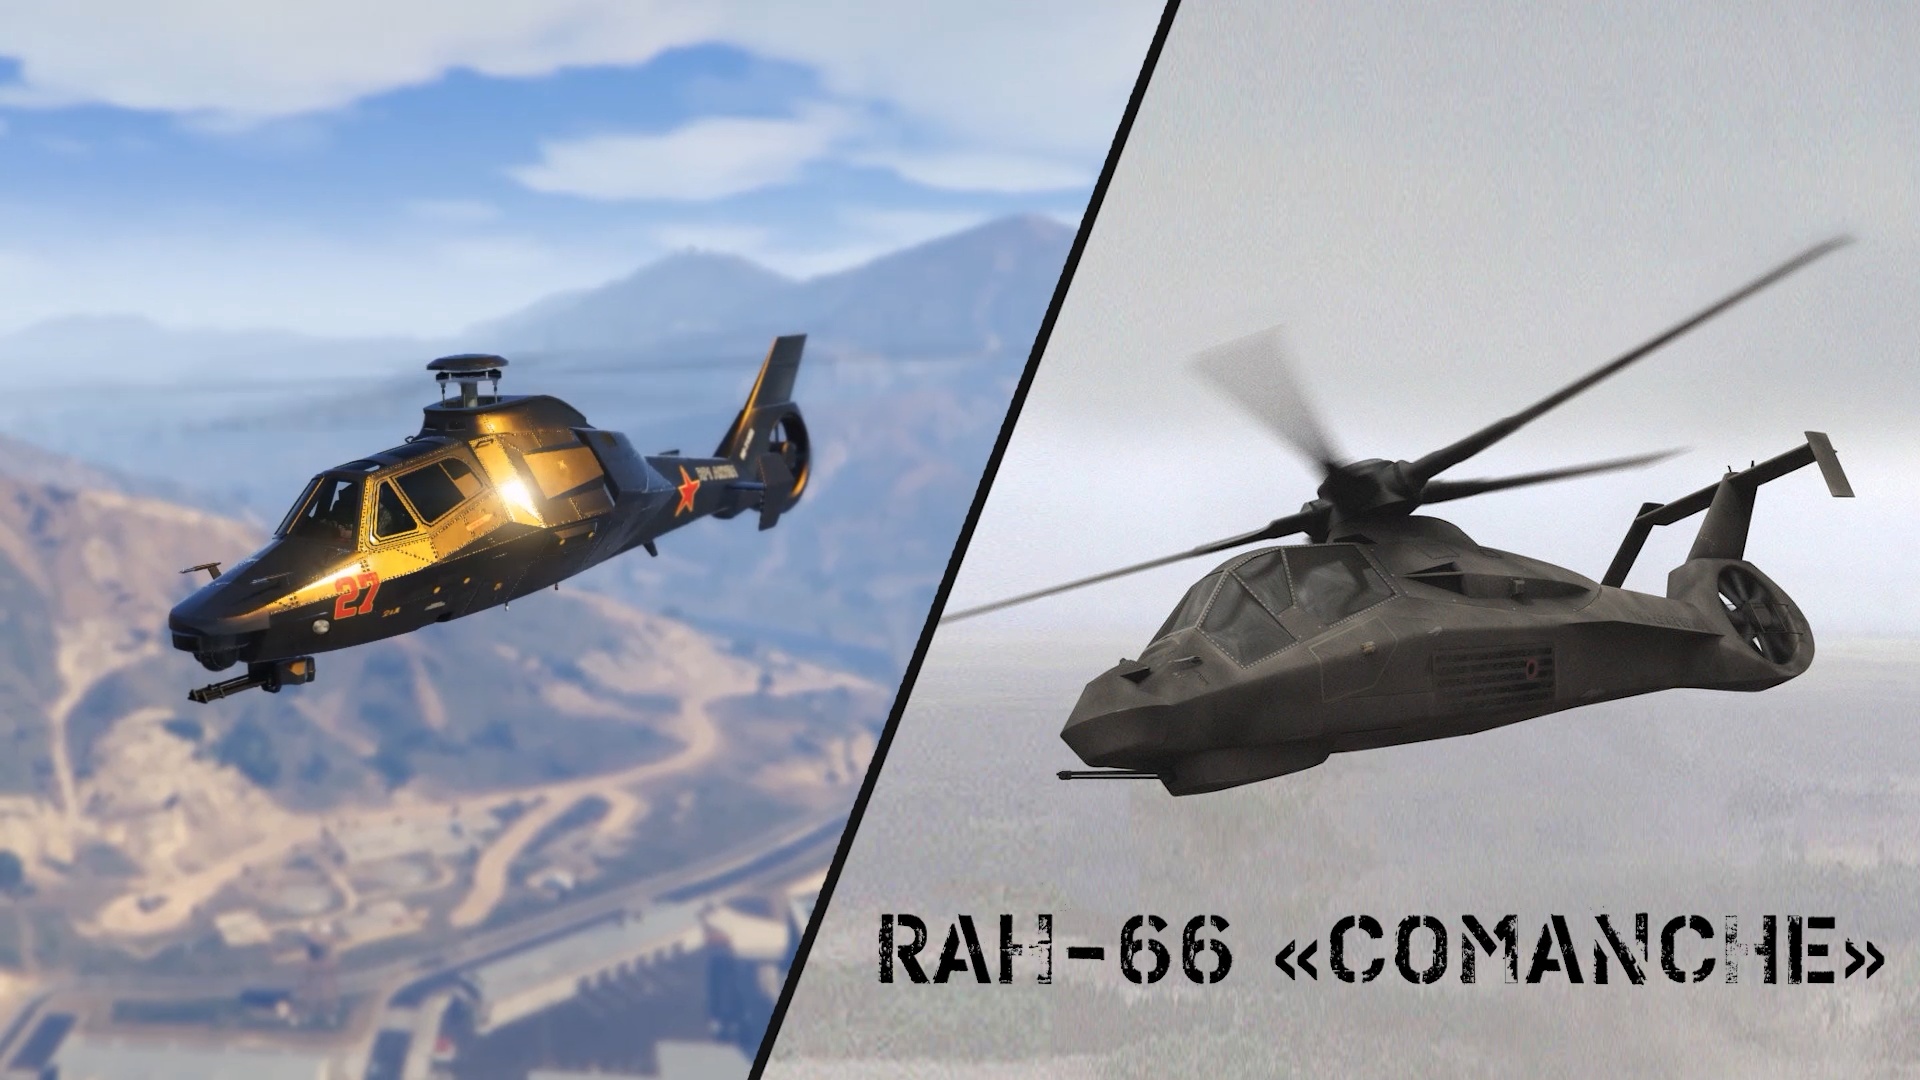 Gta 5 cheat codes for helicopter фото 63